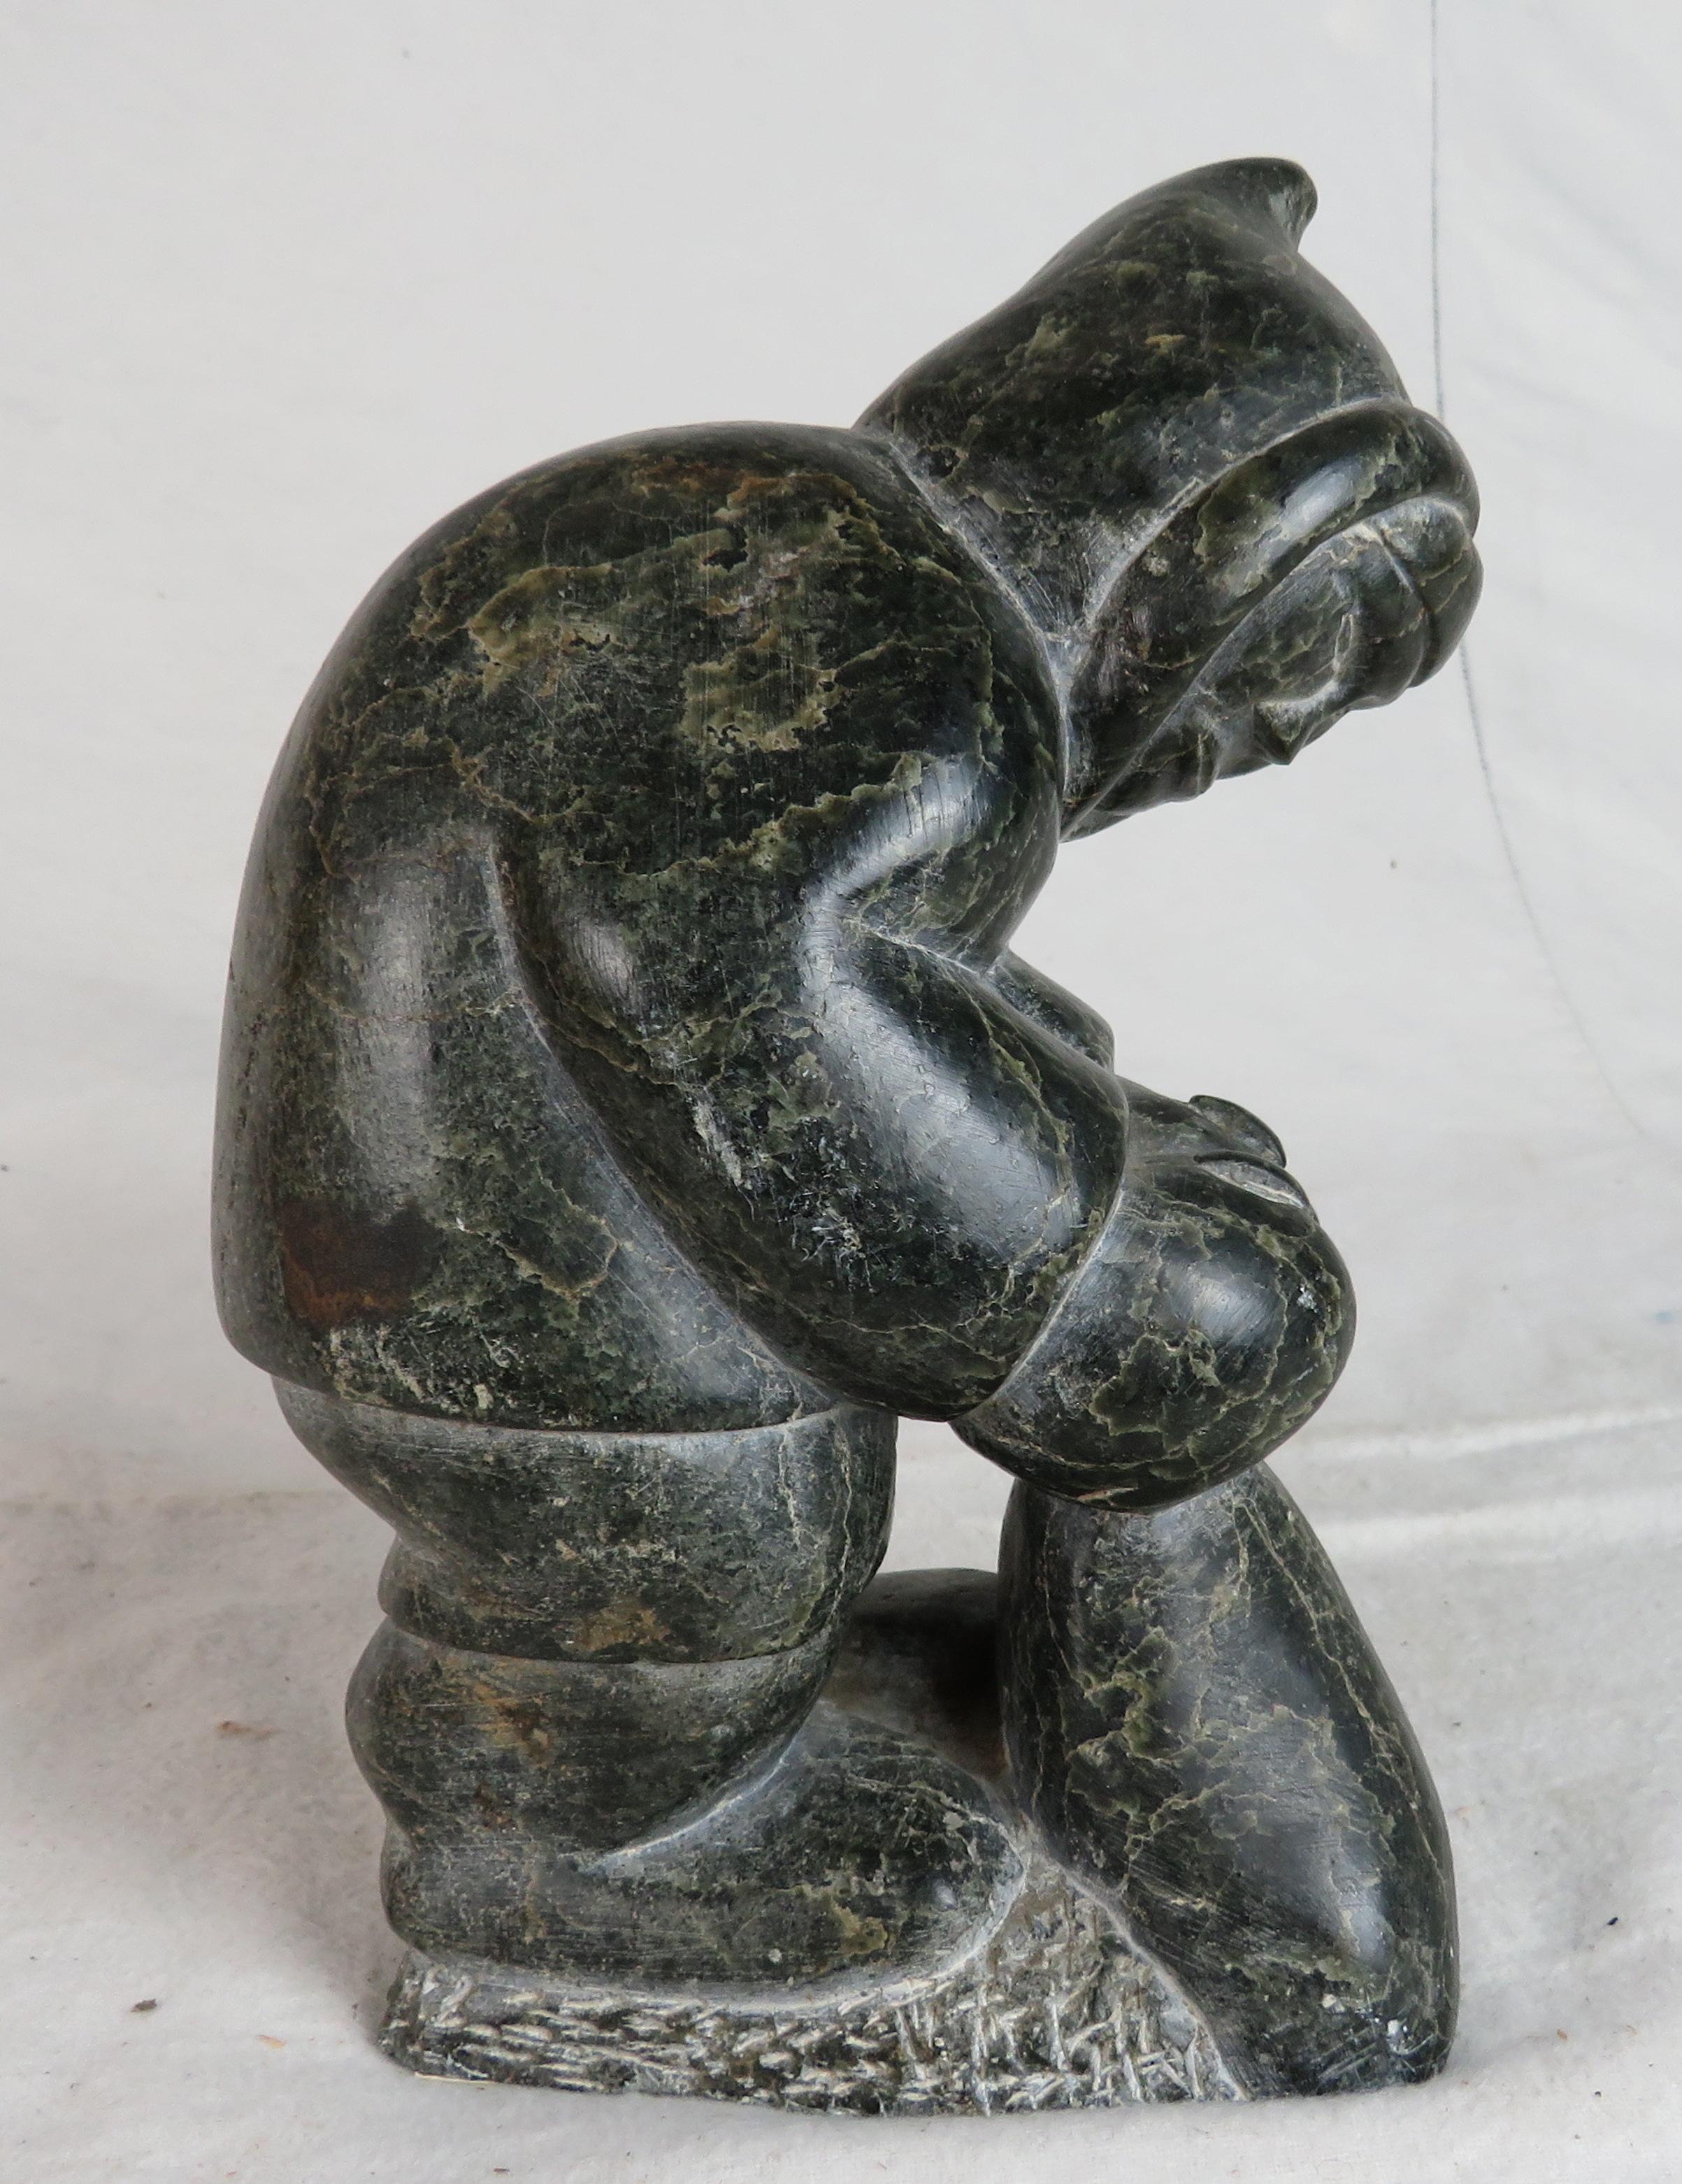 Carved Black Soapstone Inuit figure stooped over, grasping a bag at his feet.